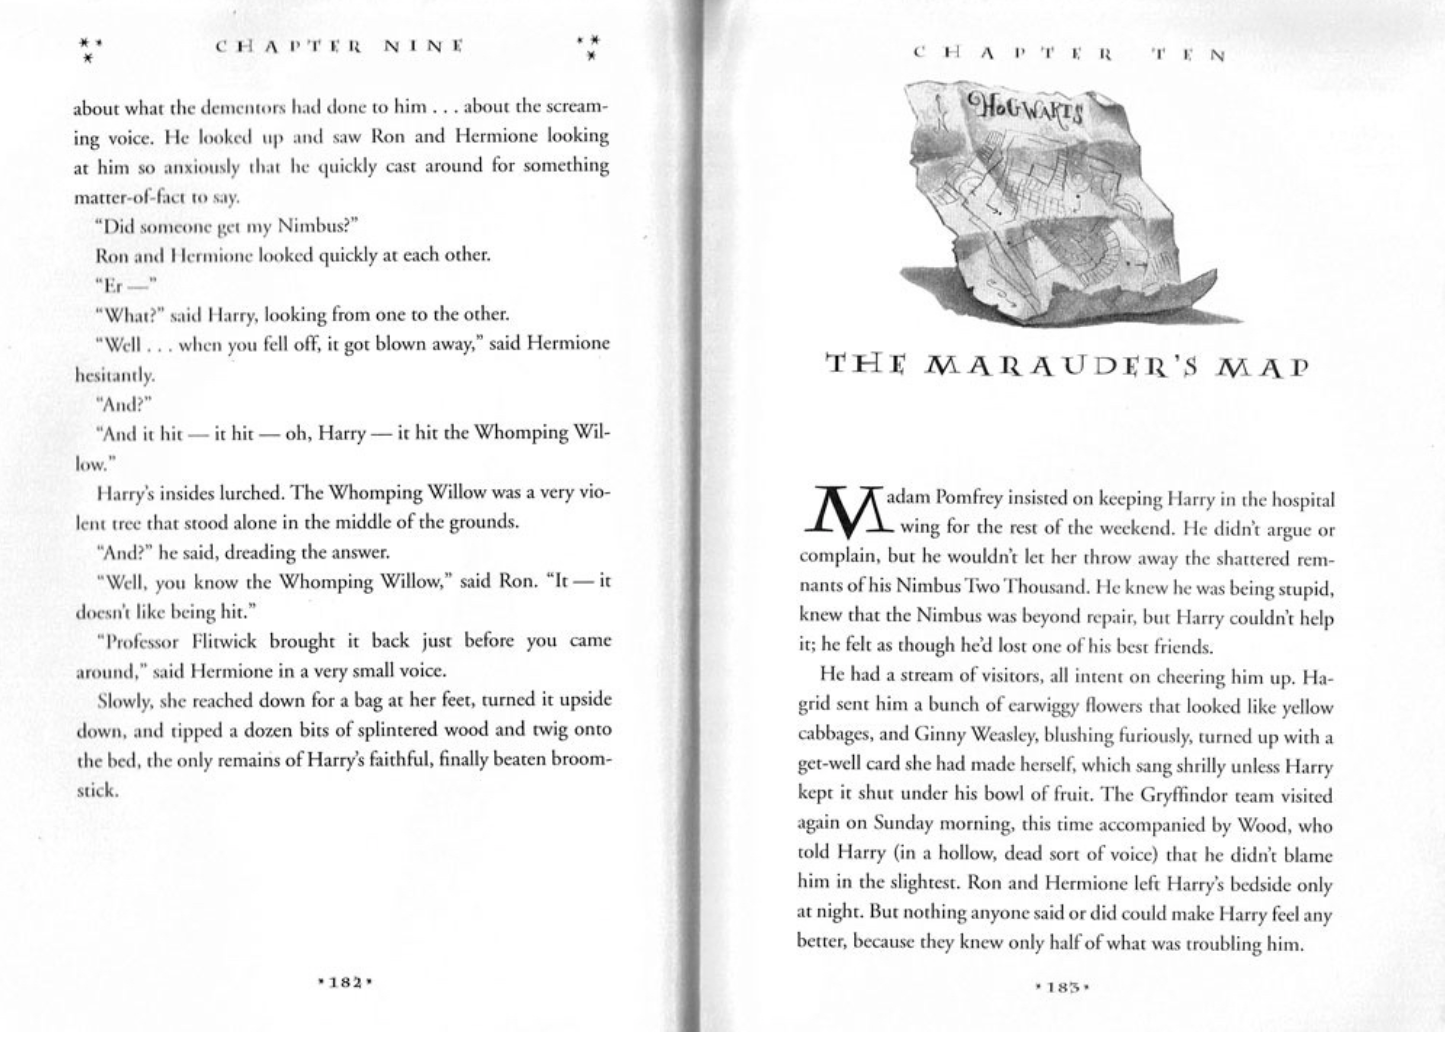 The inside of a Harry Potter extract, the chapter title shows the Lumos font which is a serif typeface.